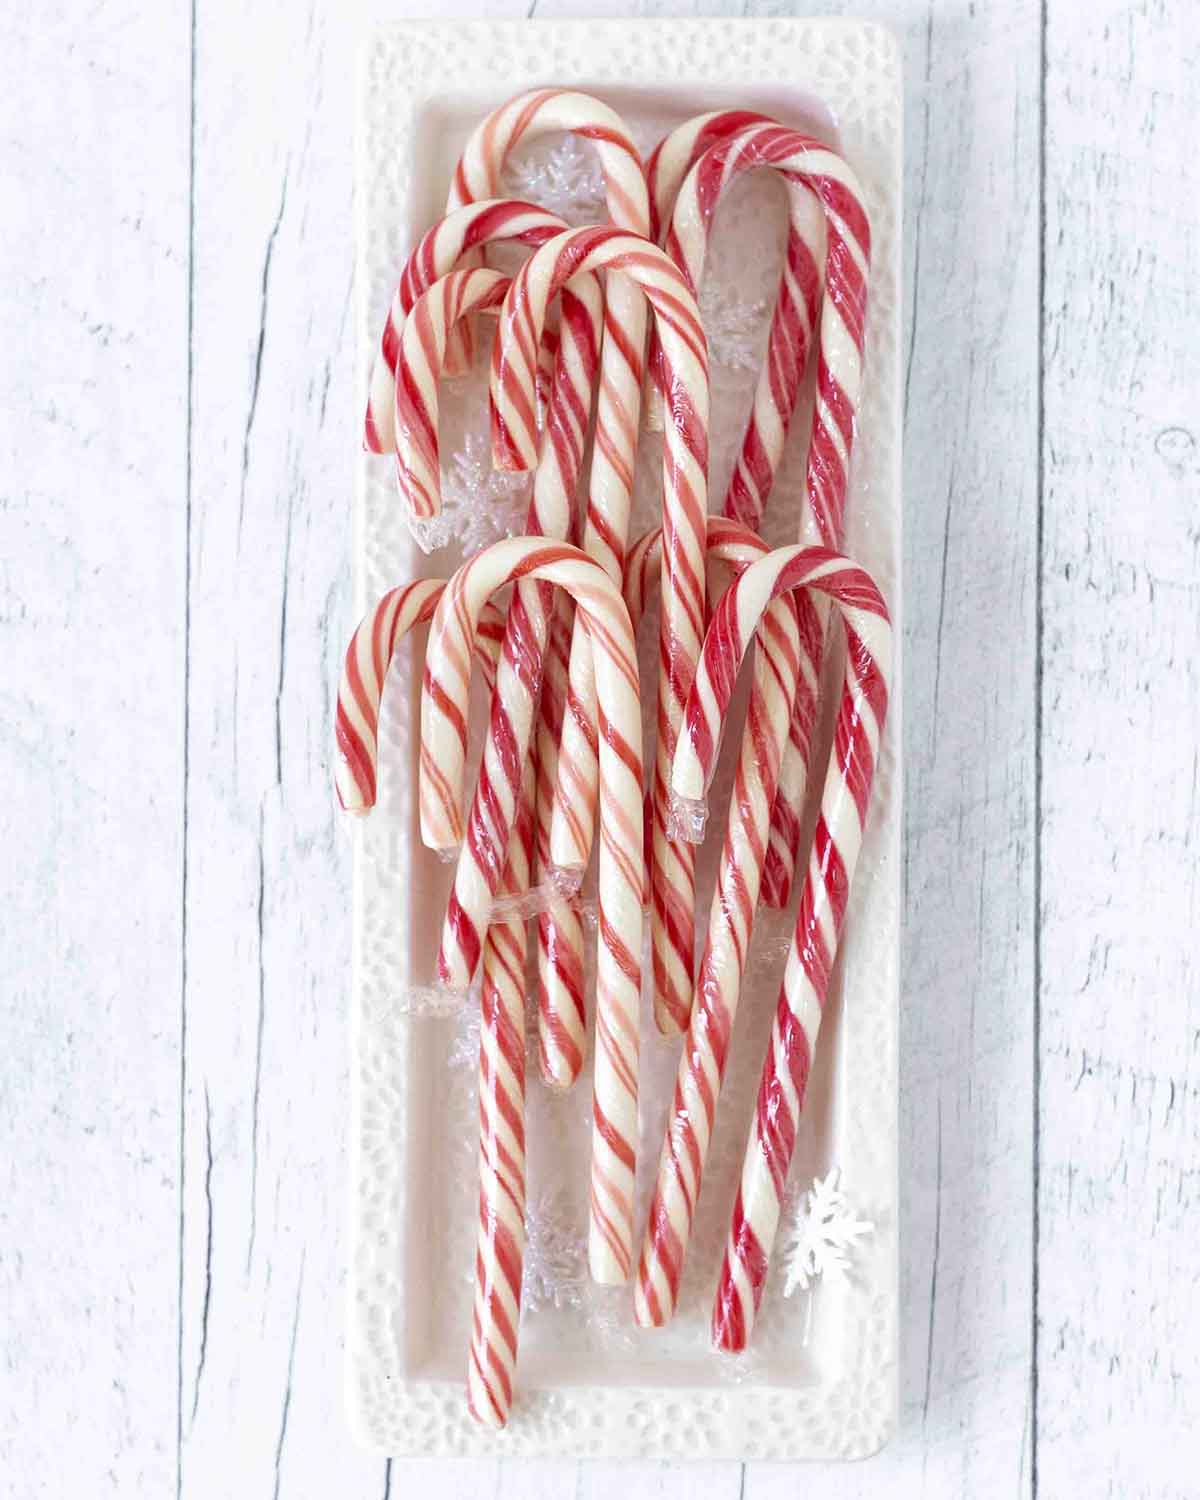 An overhead shot showing candy canes in a white rectangular plate.